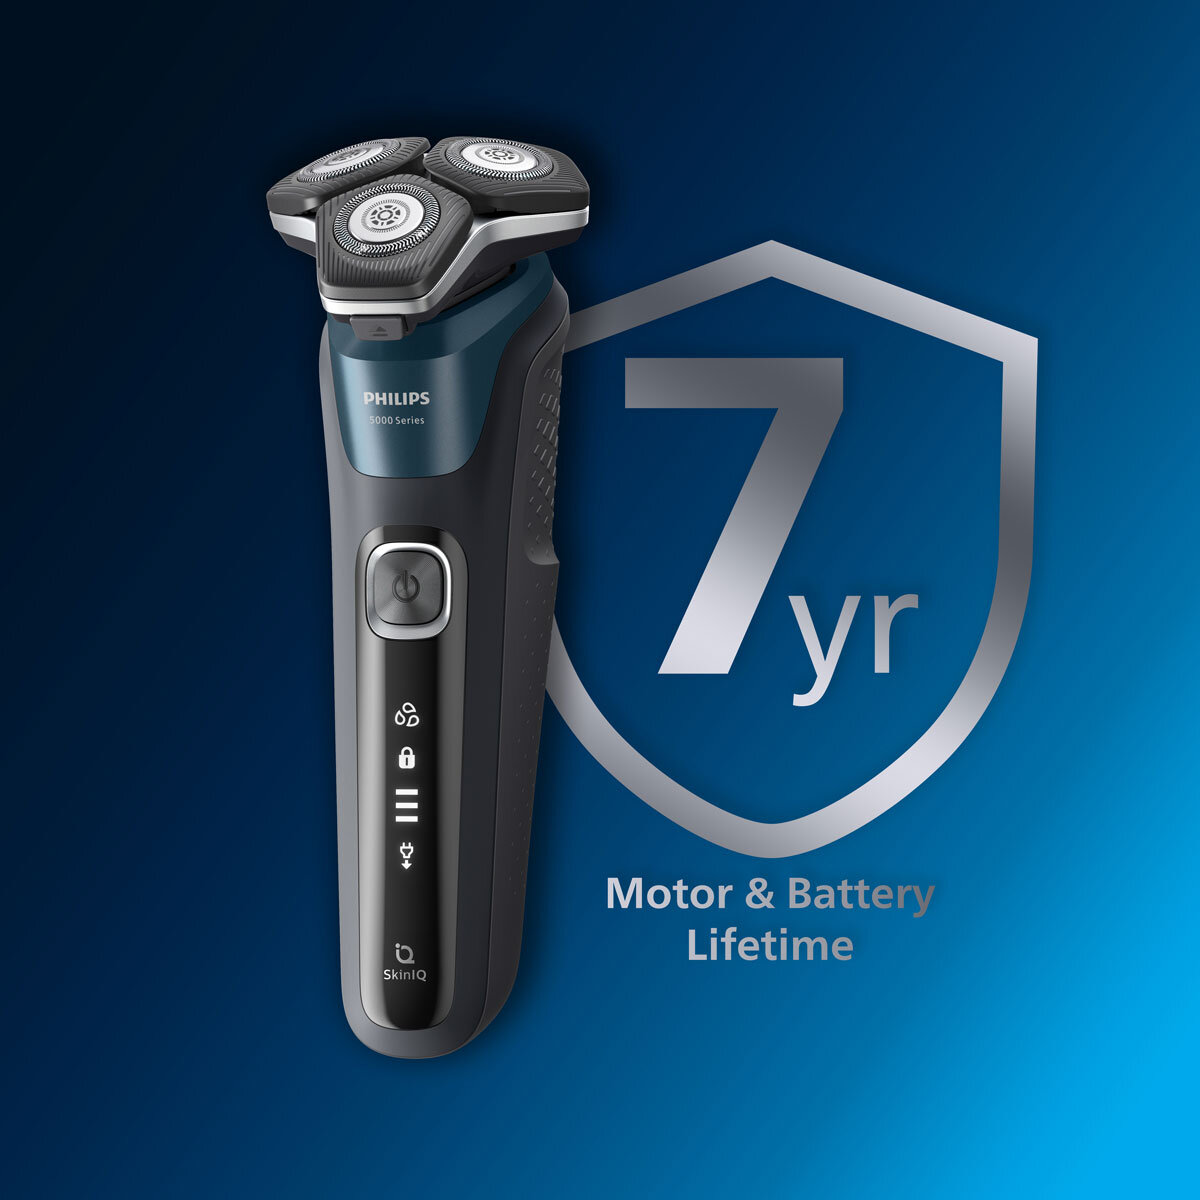  Philips S5466 Series 5000 Electric Wet and Dry Shaver,  Powerful & Gentle Shave, Steel Precision Clipper System, Flexible Shaving  Heads : Beauty & Personal Care